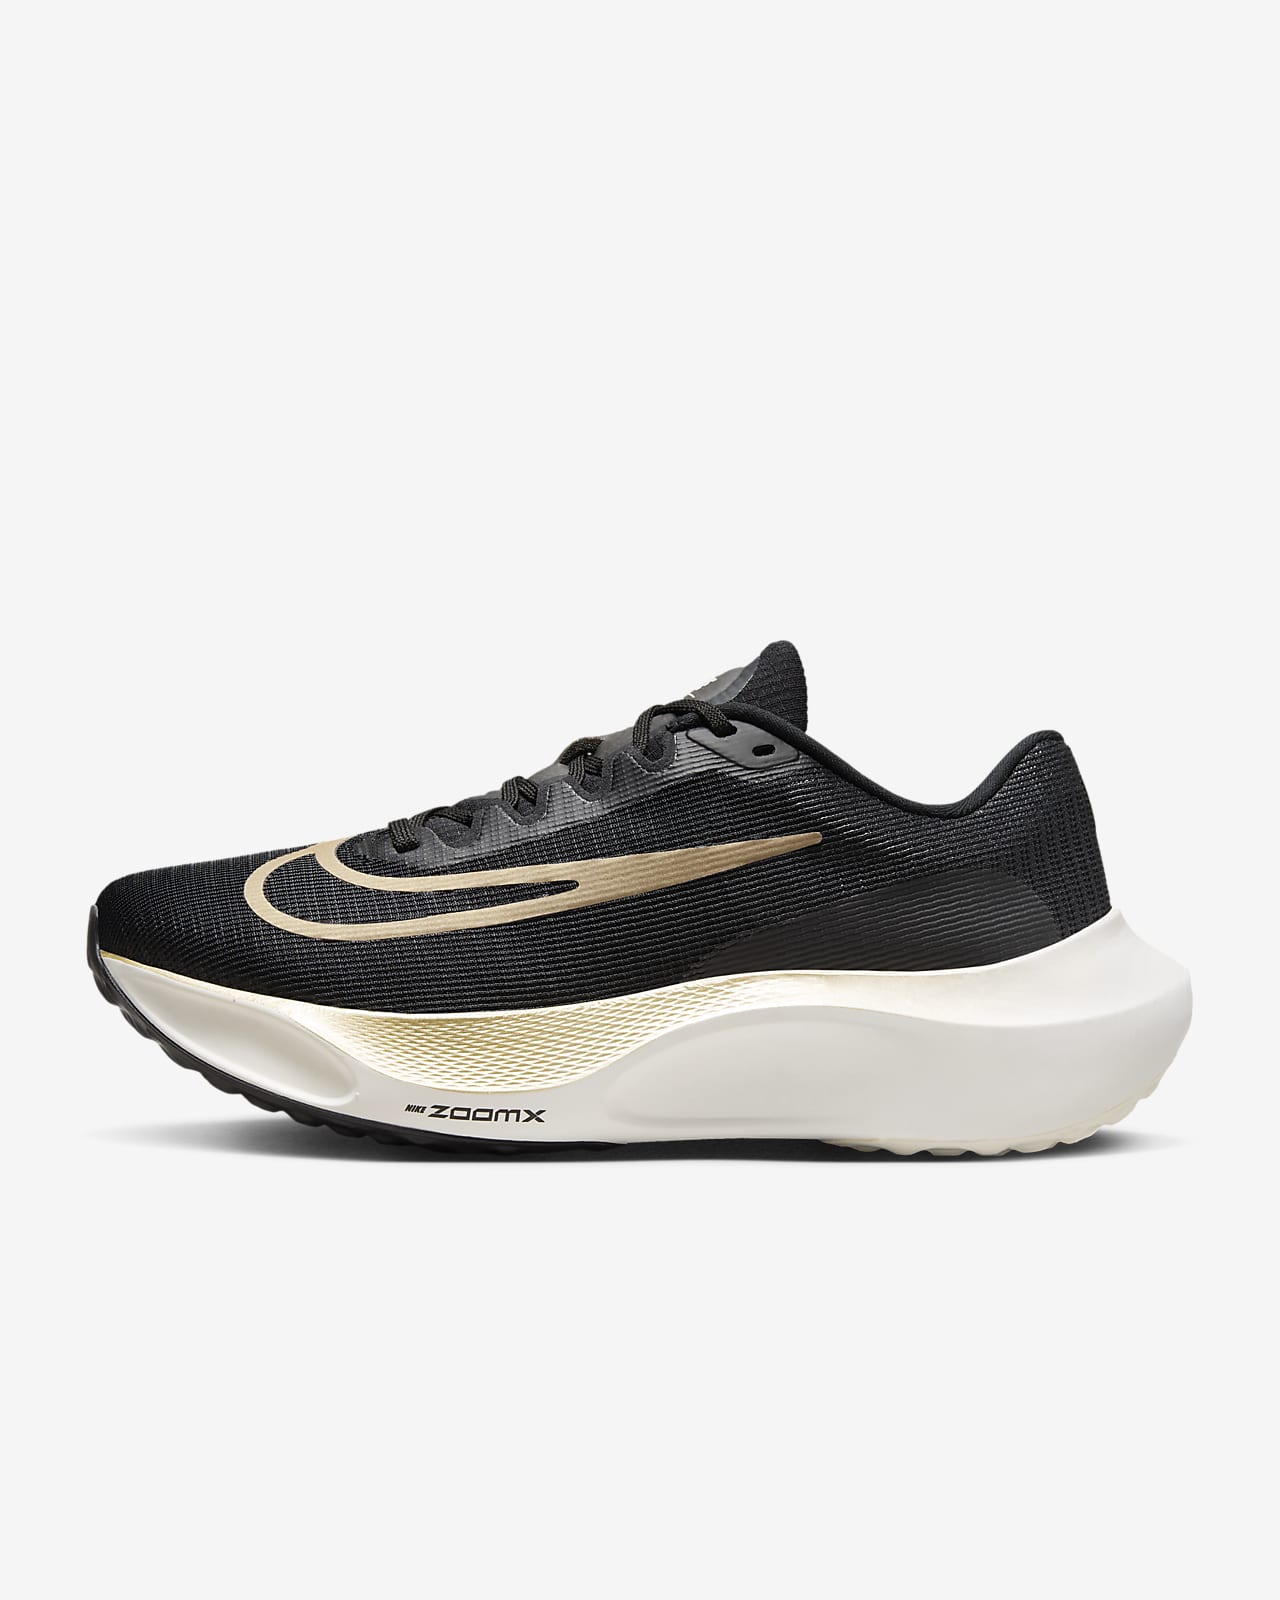 Nike Zoom Fly 5 Men's Road Running Shoes.